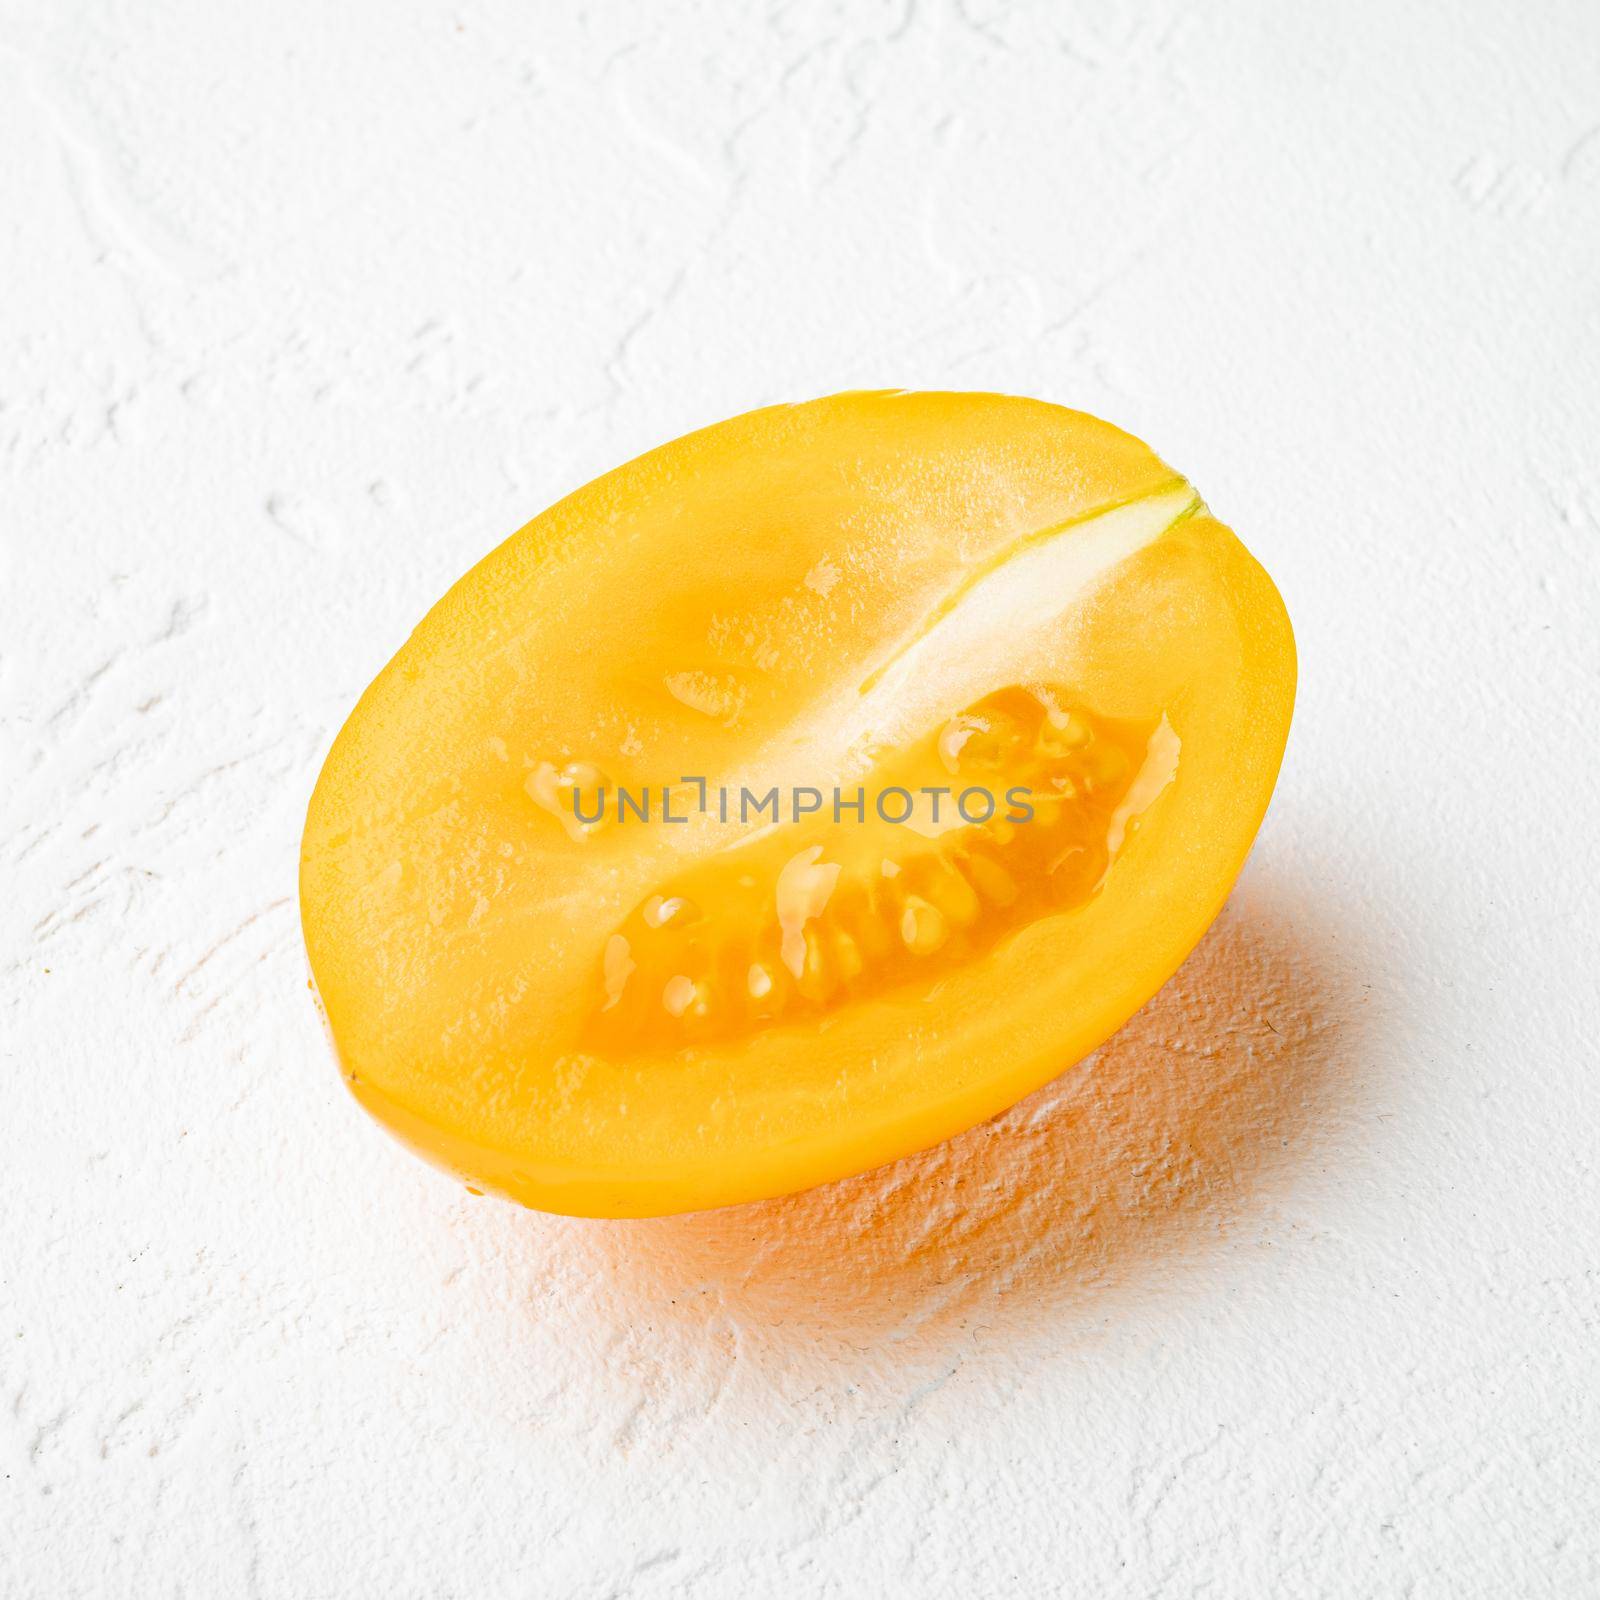 Ripe Yellow plum tomatoes, on white stone table background, square format by Ilianesolenyi